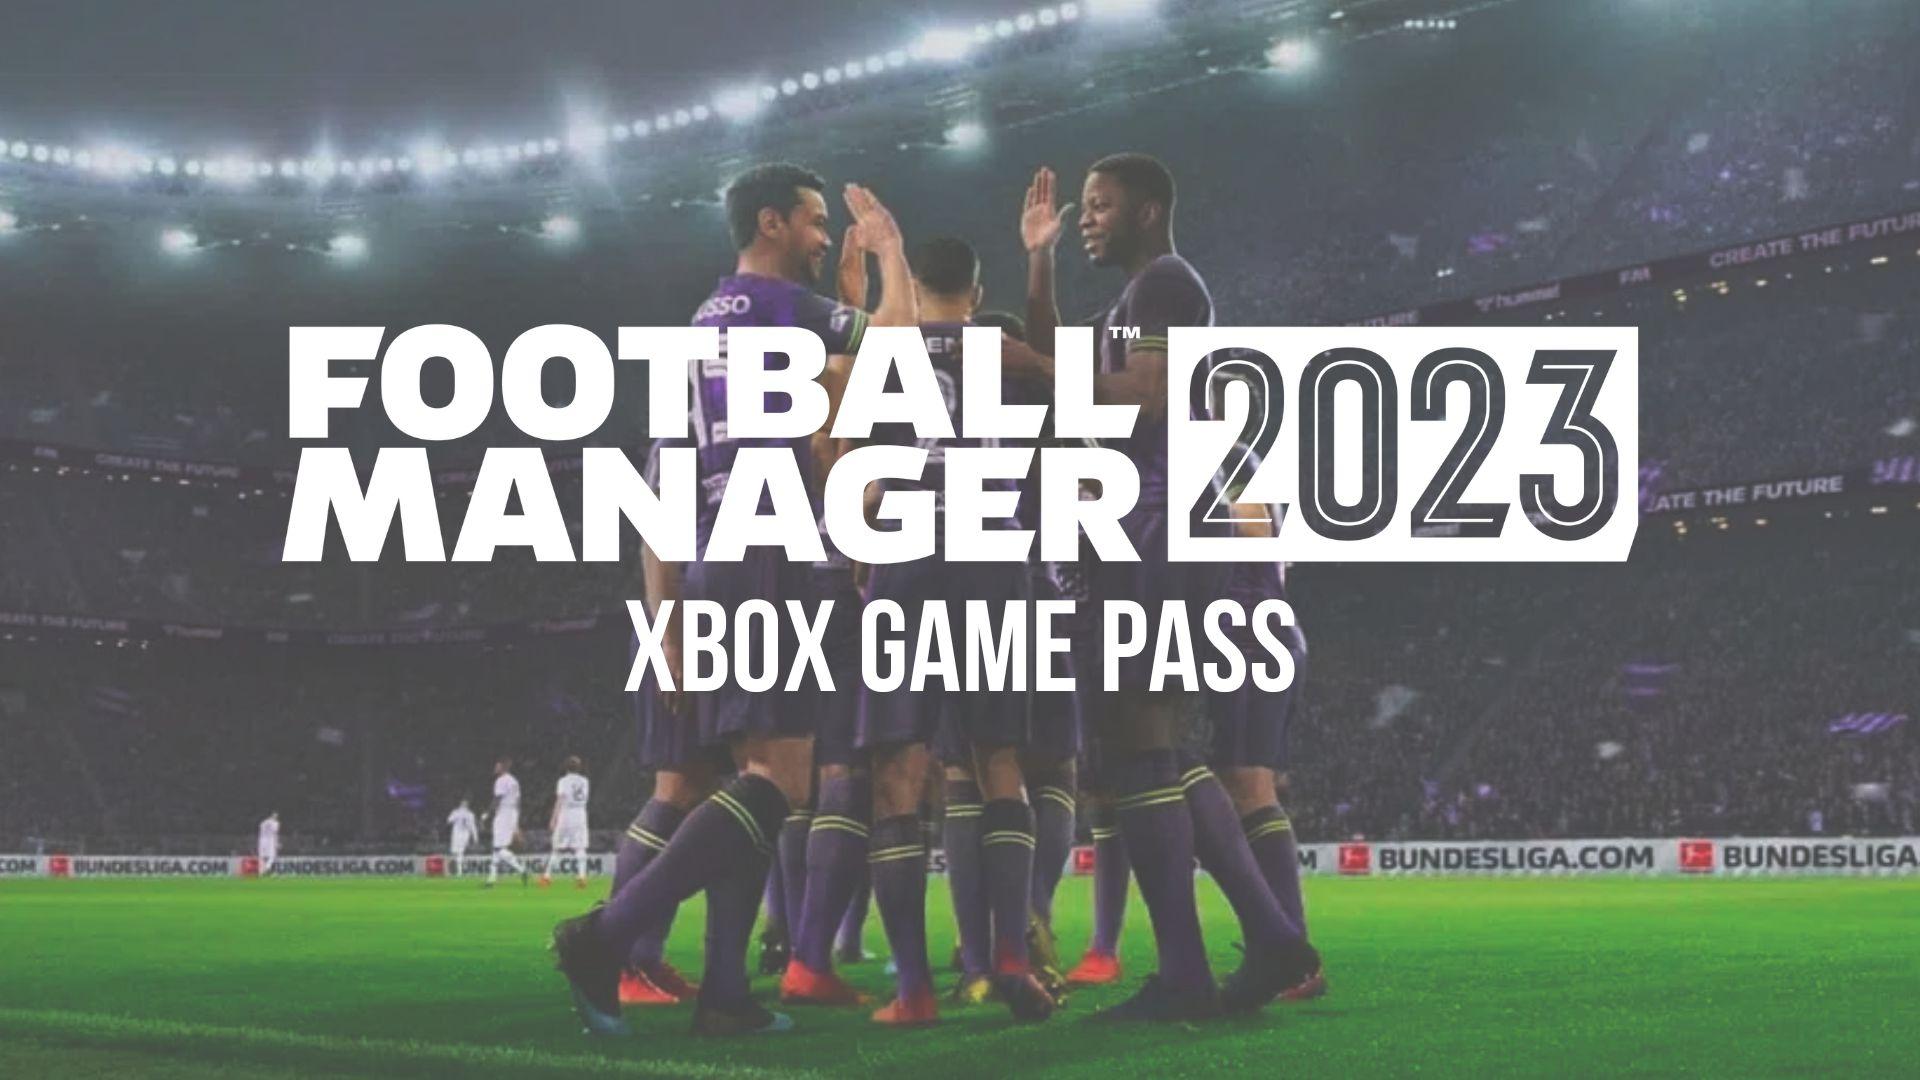 Football Manager 2023 logo and game pass text